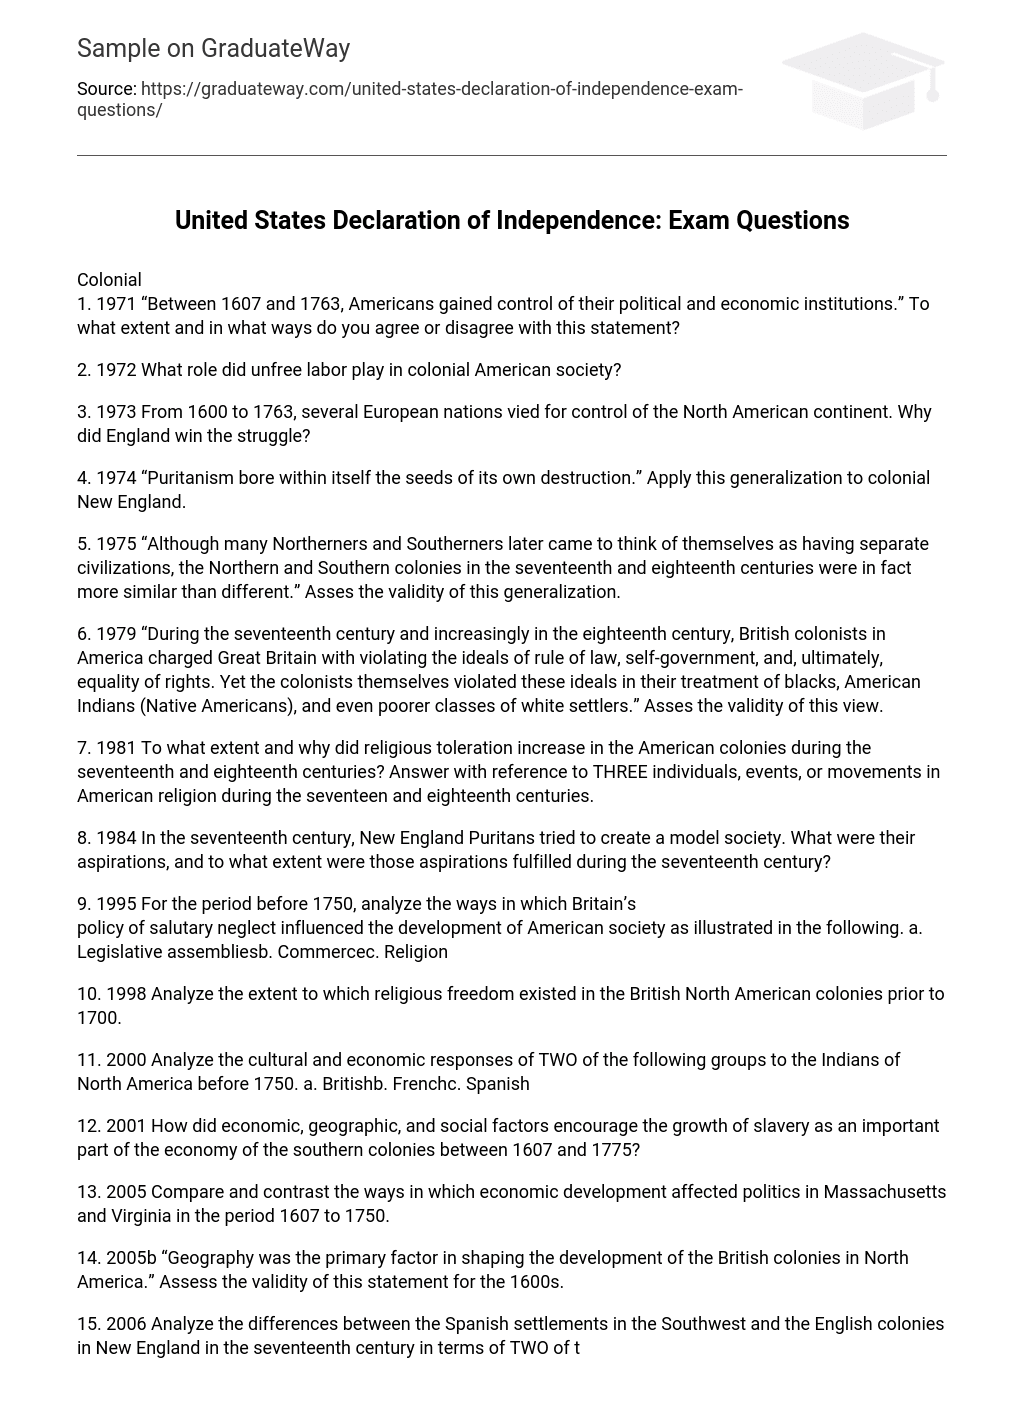 United States Declaration of Independence: Exam Questions